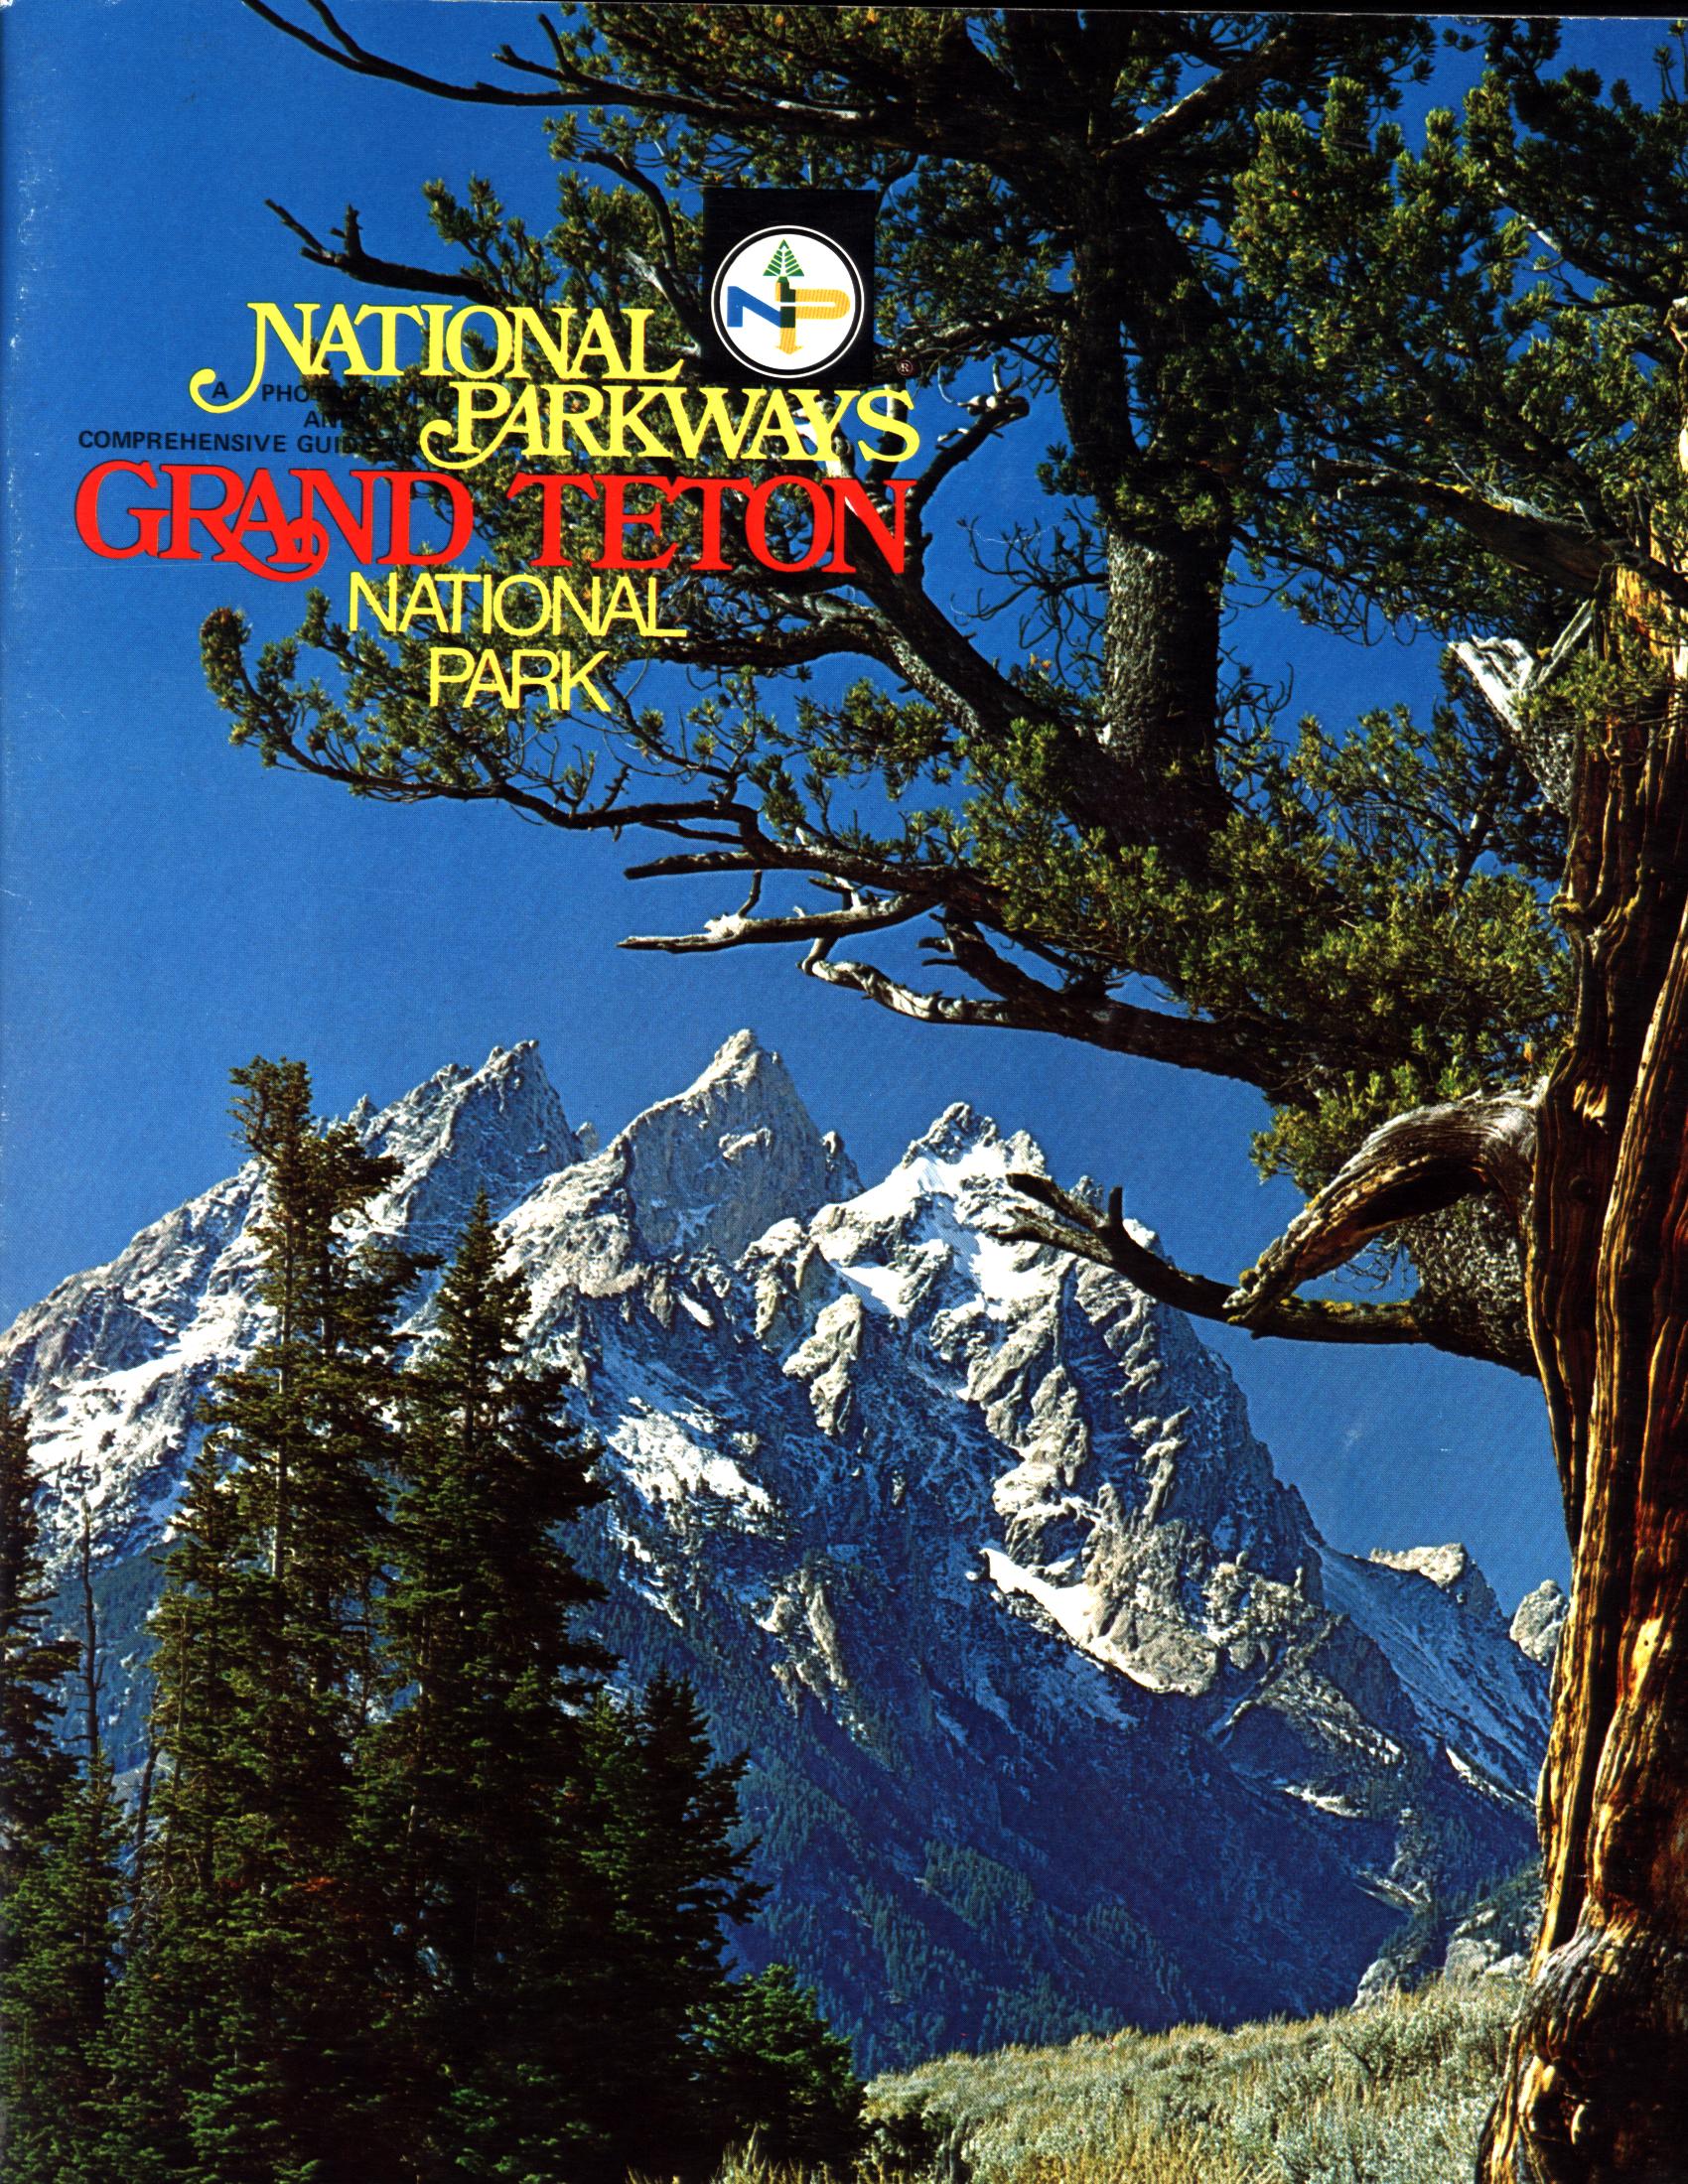 GRAND TETON NATIONAL PARK--a photographic and comprehensive guide